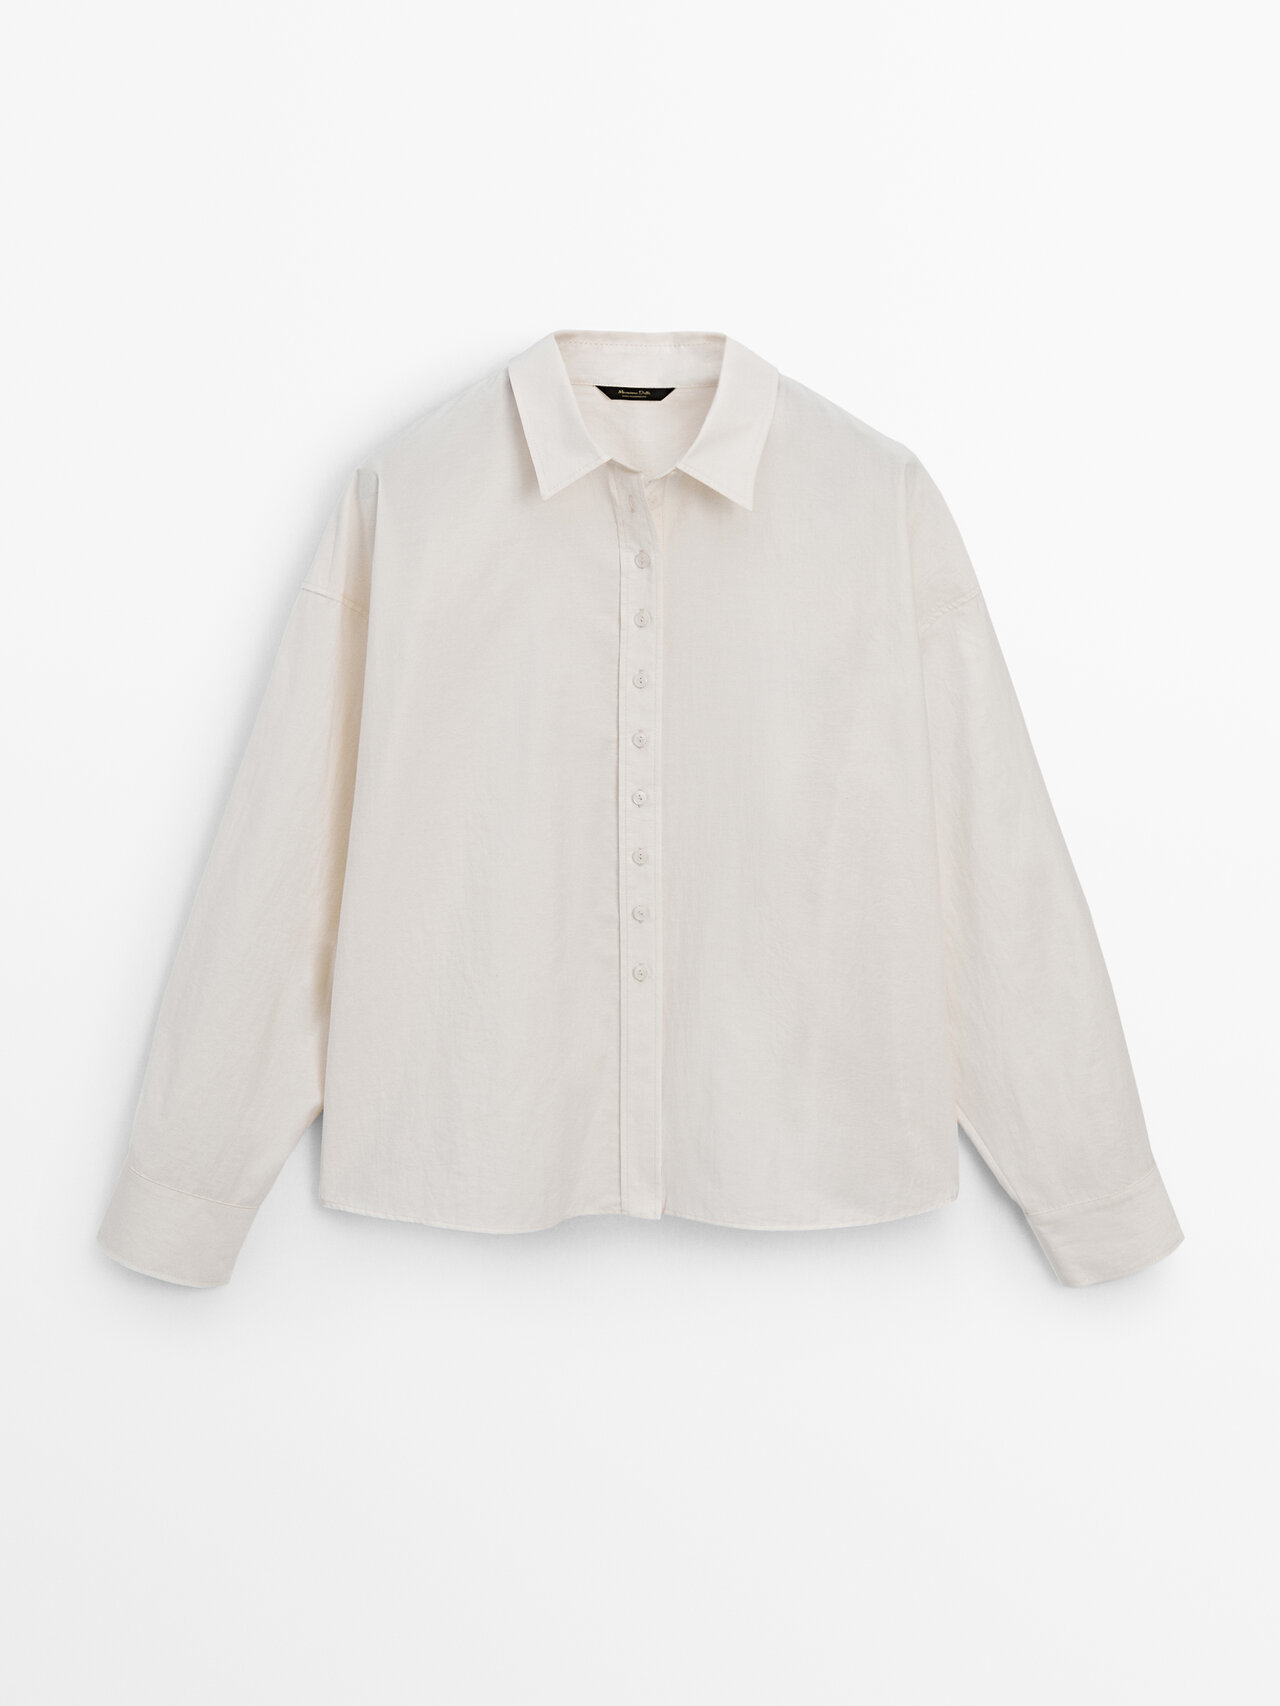 Massimo Dutti Cropped Shirt With Button Details In Cream